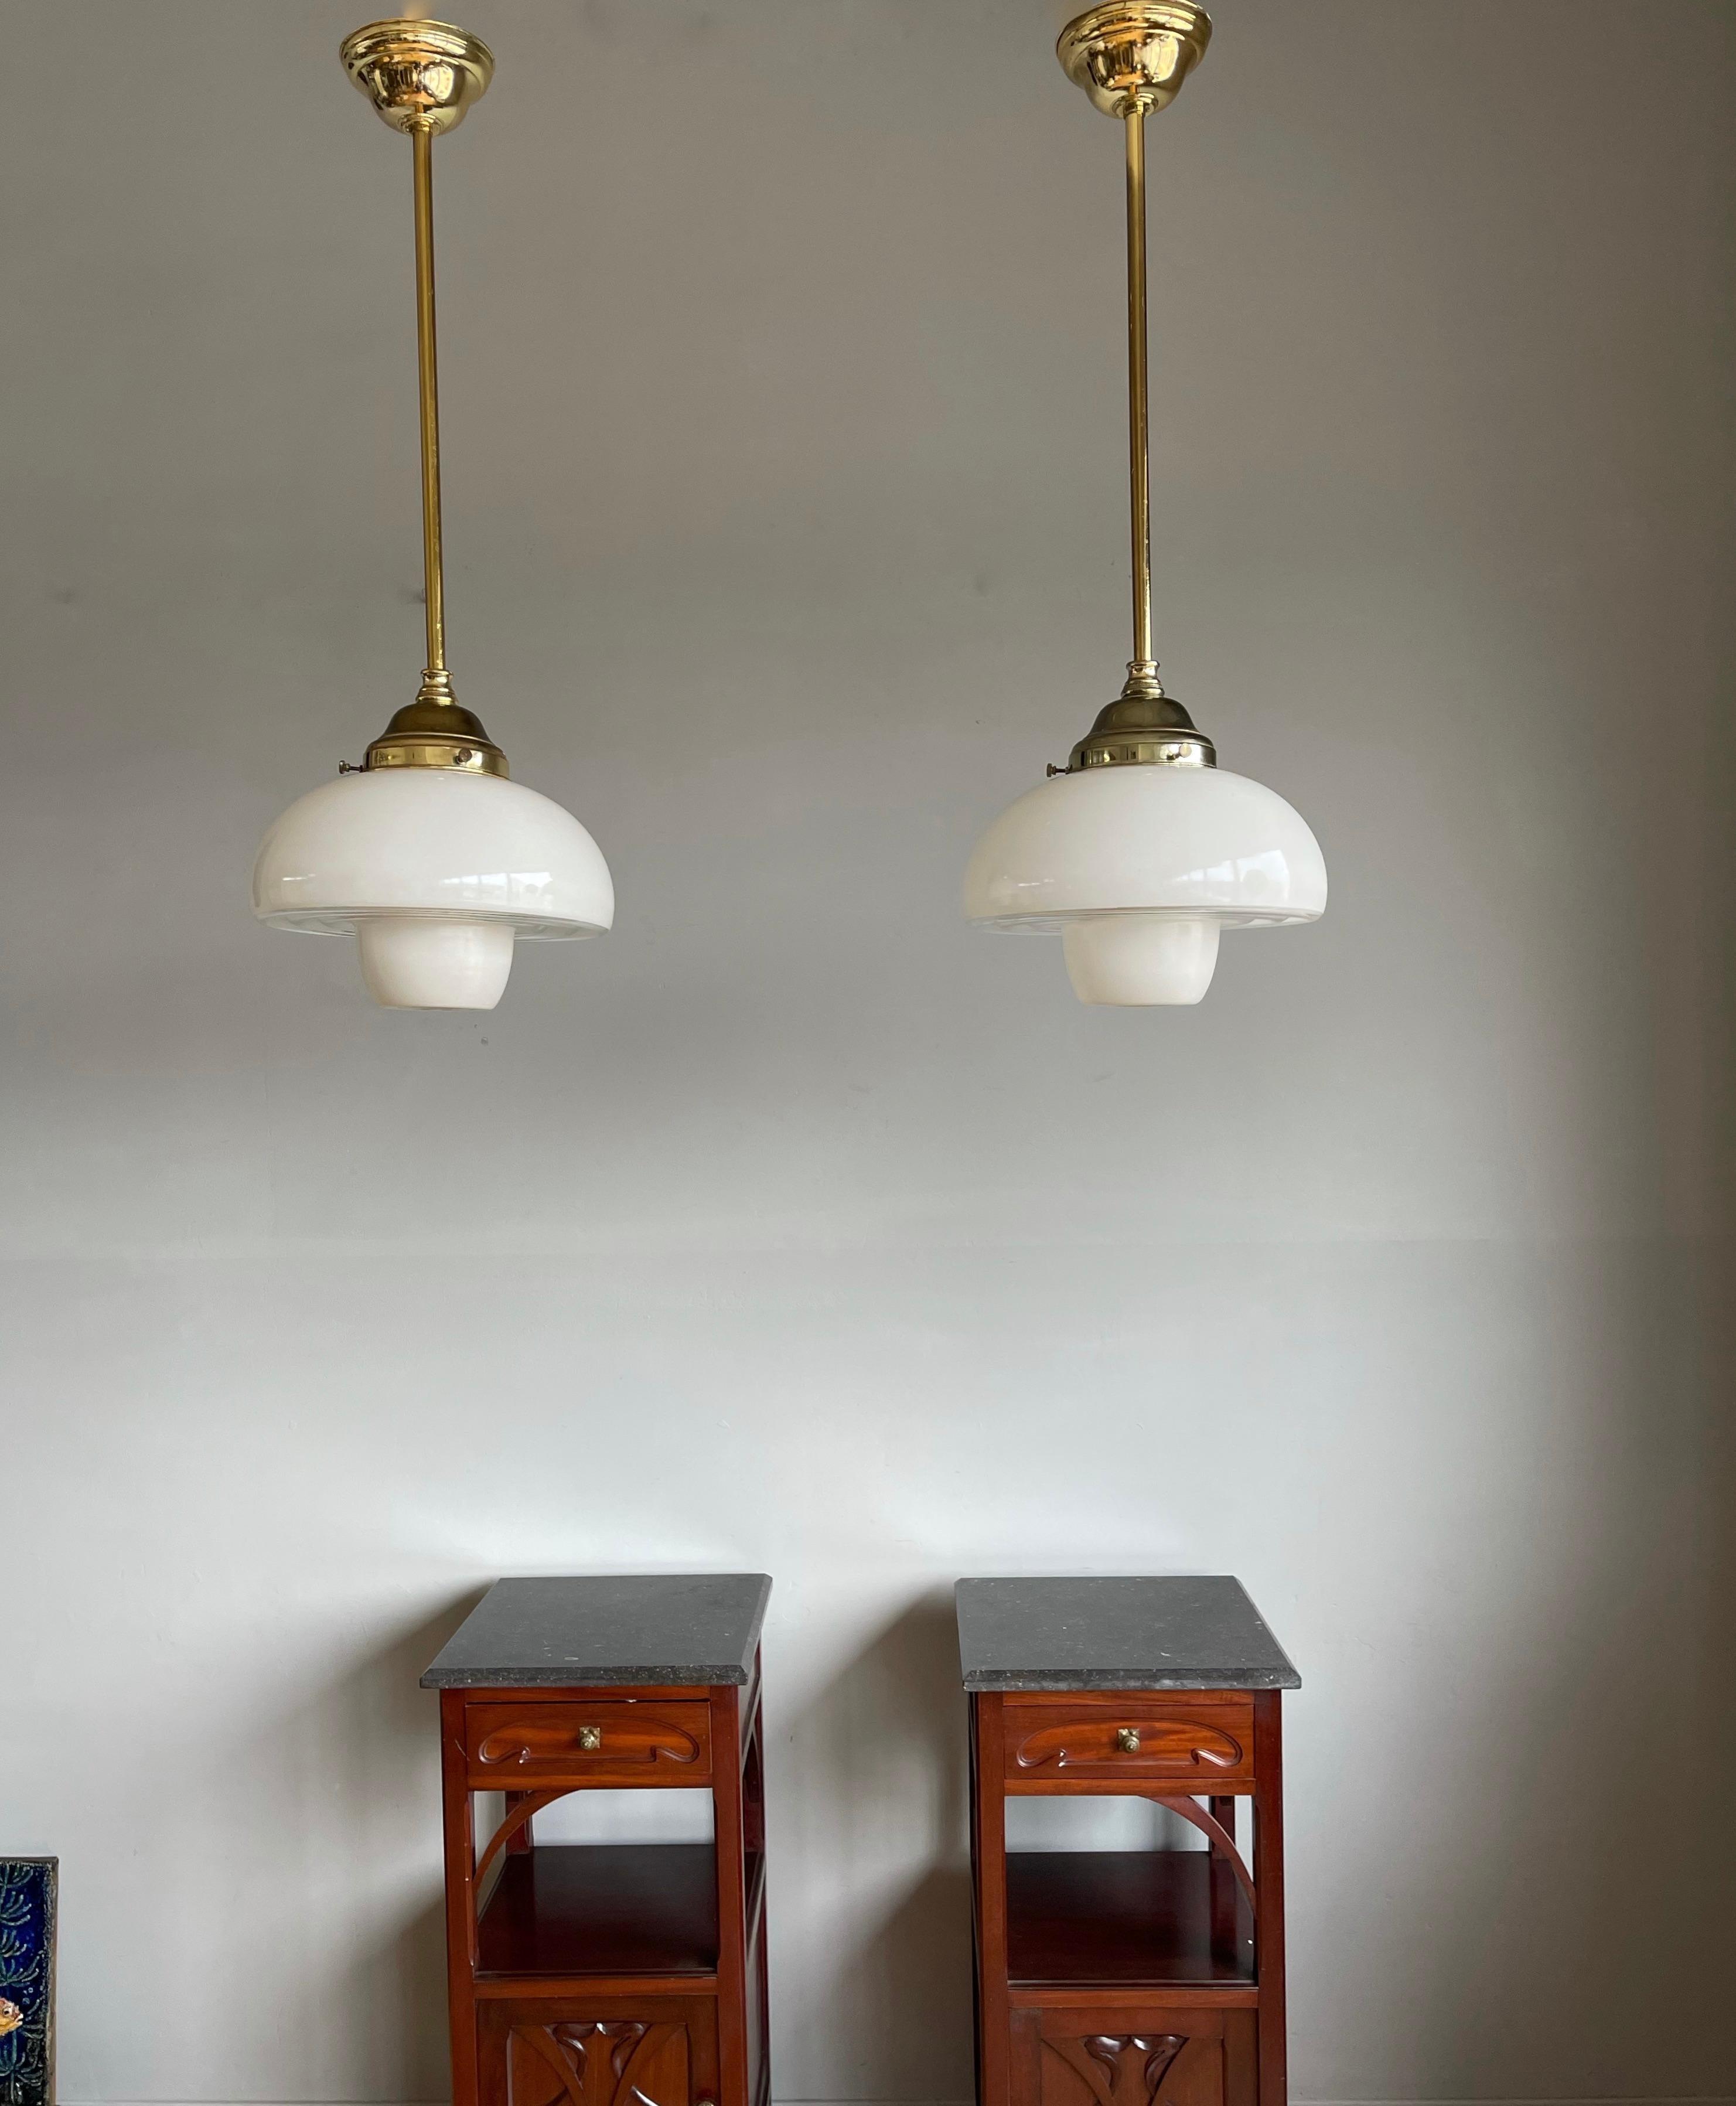 Beautiful shape and excellent condition pendants.

Finding one rare light fixture is a good thing, but finding two is always that extra bit special. So if you are looking for a beautiful pair of pendants to grace your entry hall, kitchen or bedroom